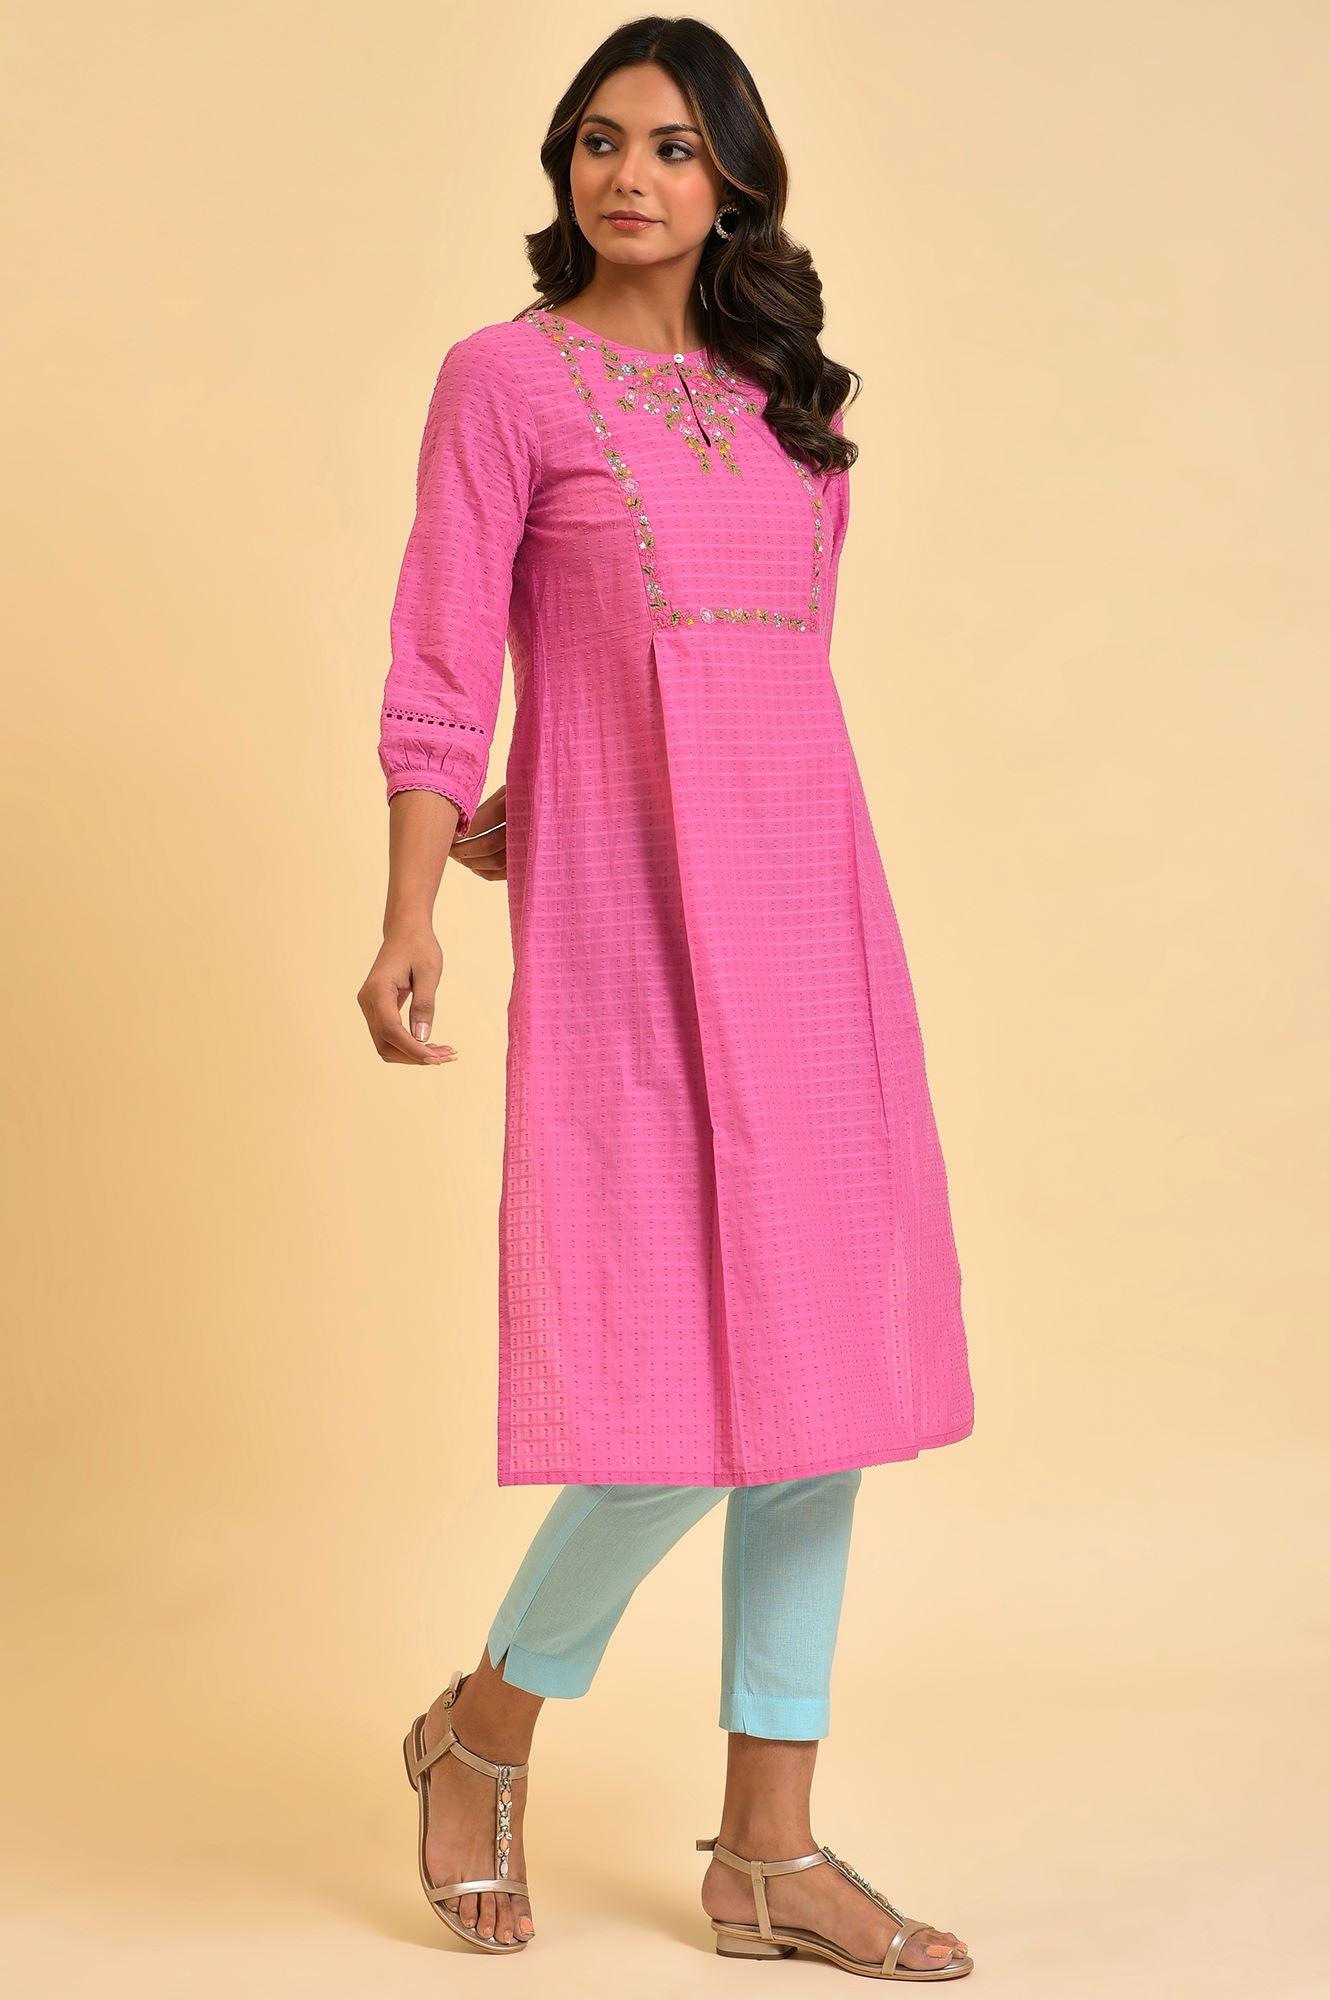 Plus Size Pink Floral Embroidered kurta In Textured Fabric - wforwoman